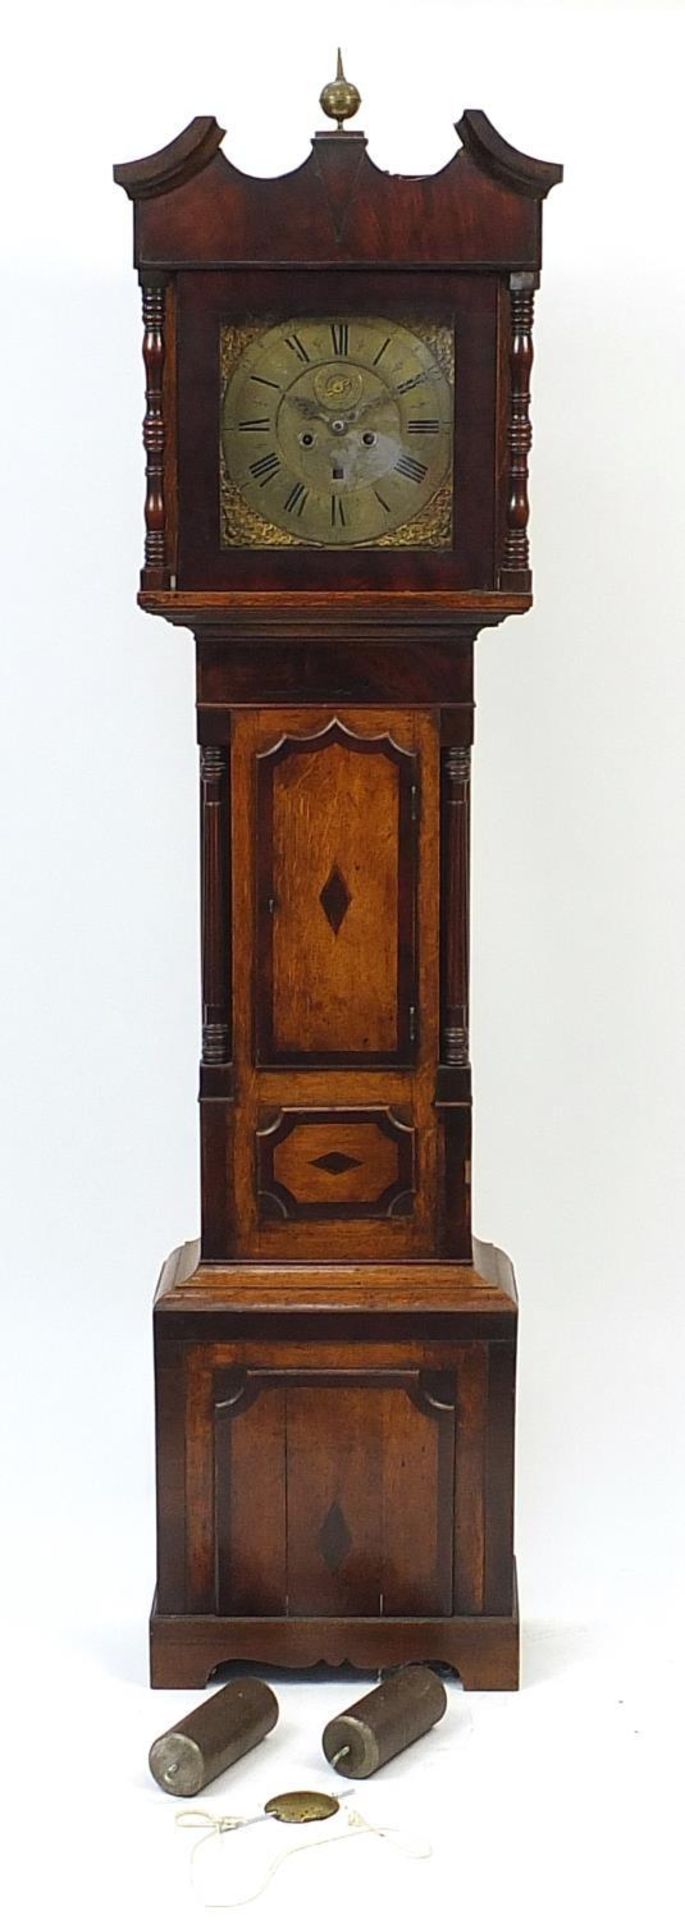 Early 19th century mahogany and oak longcase clock with brass face and subsidiary dial, the circular